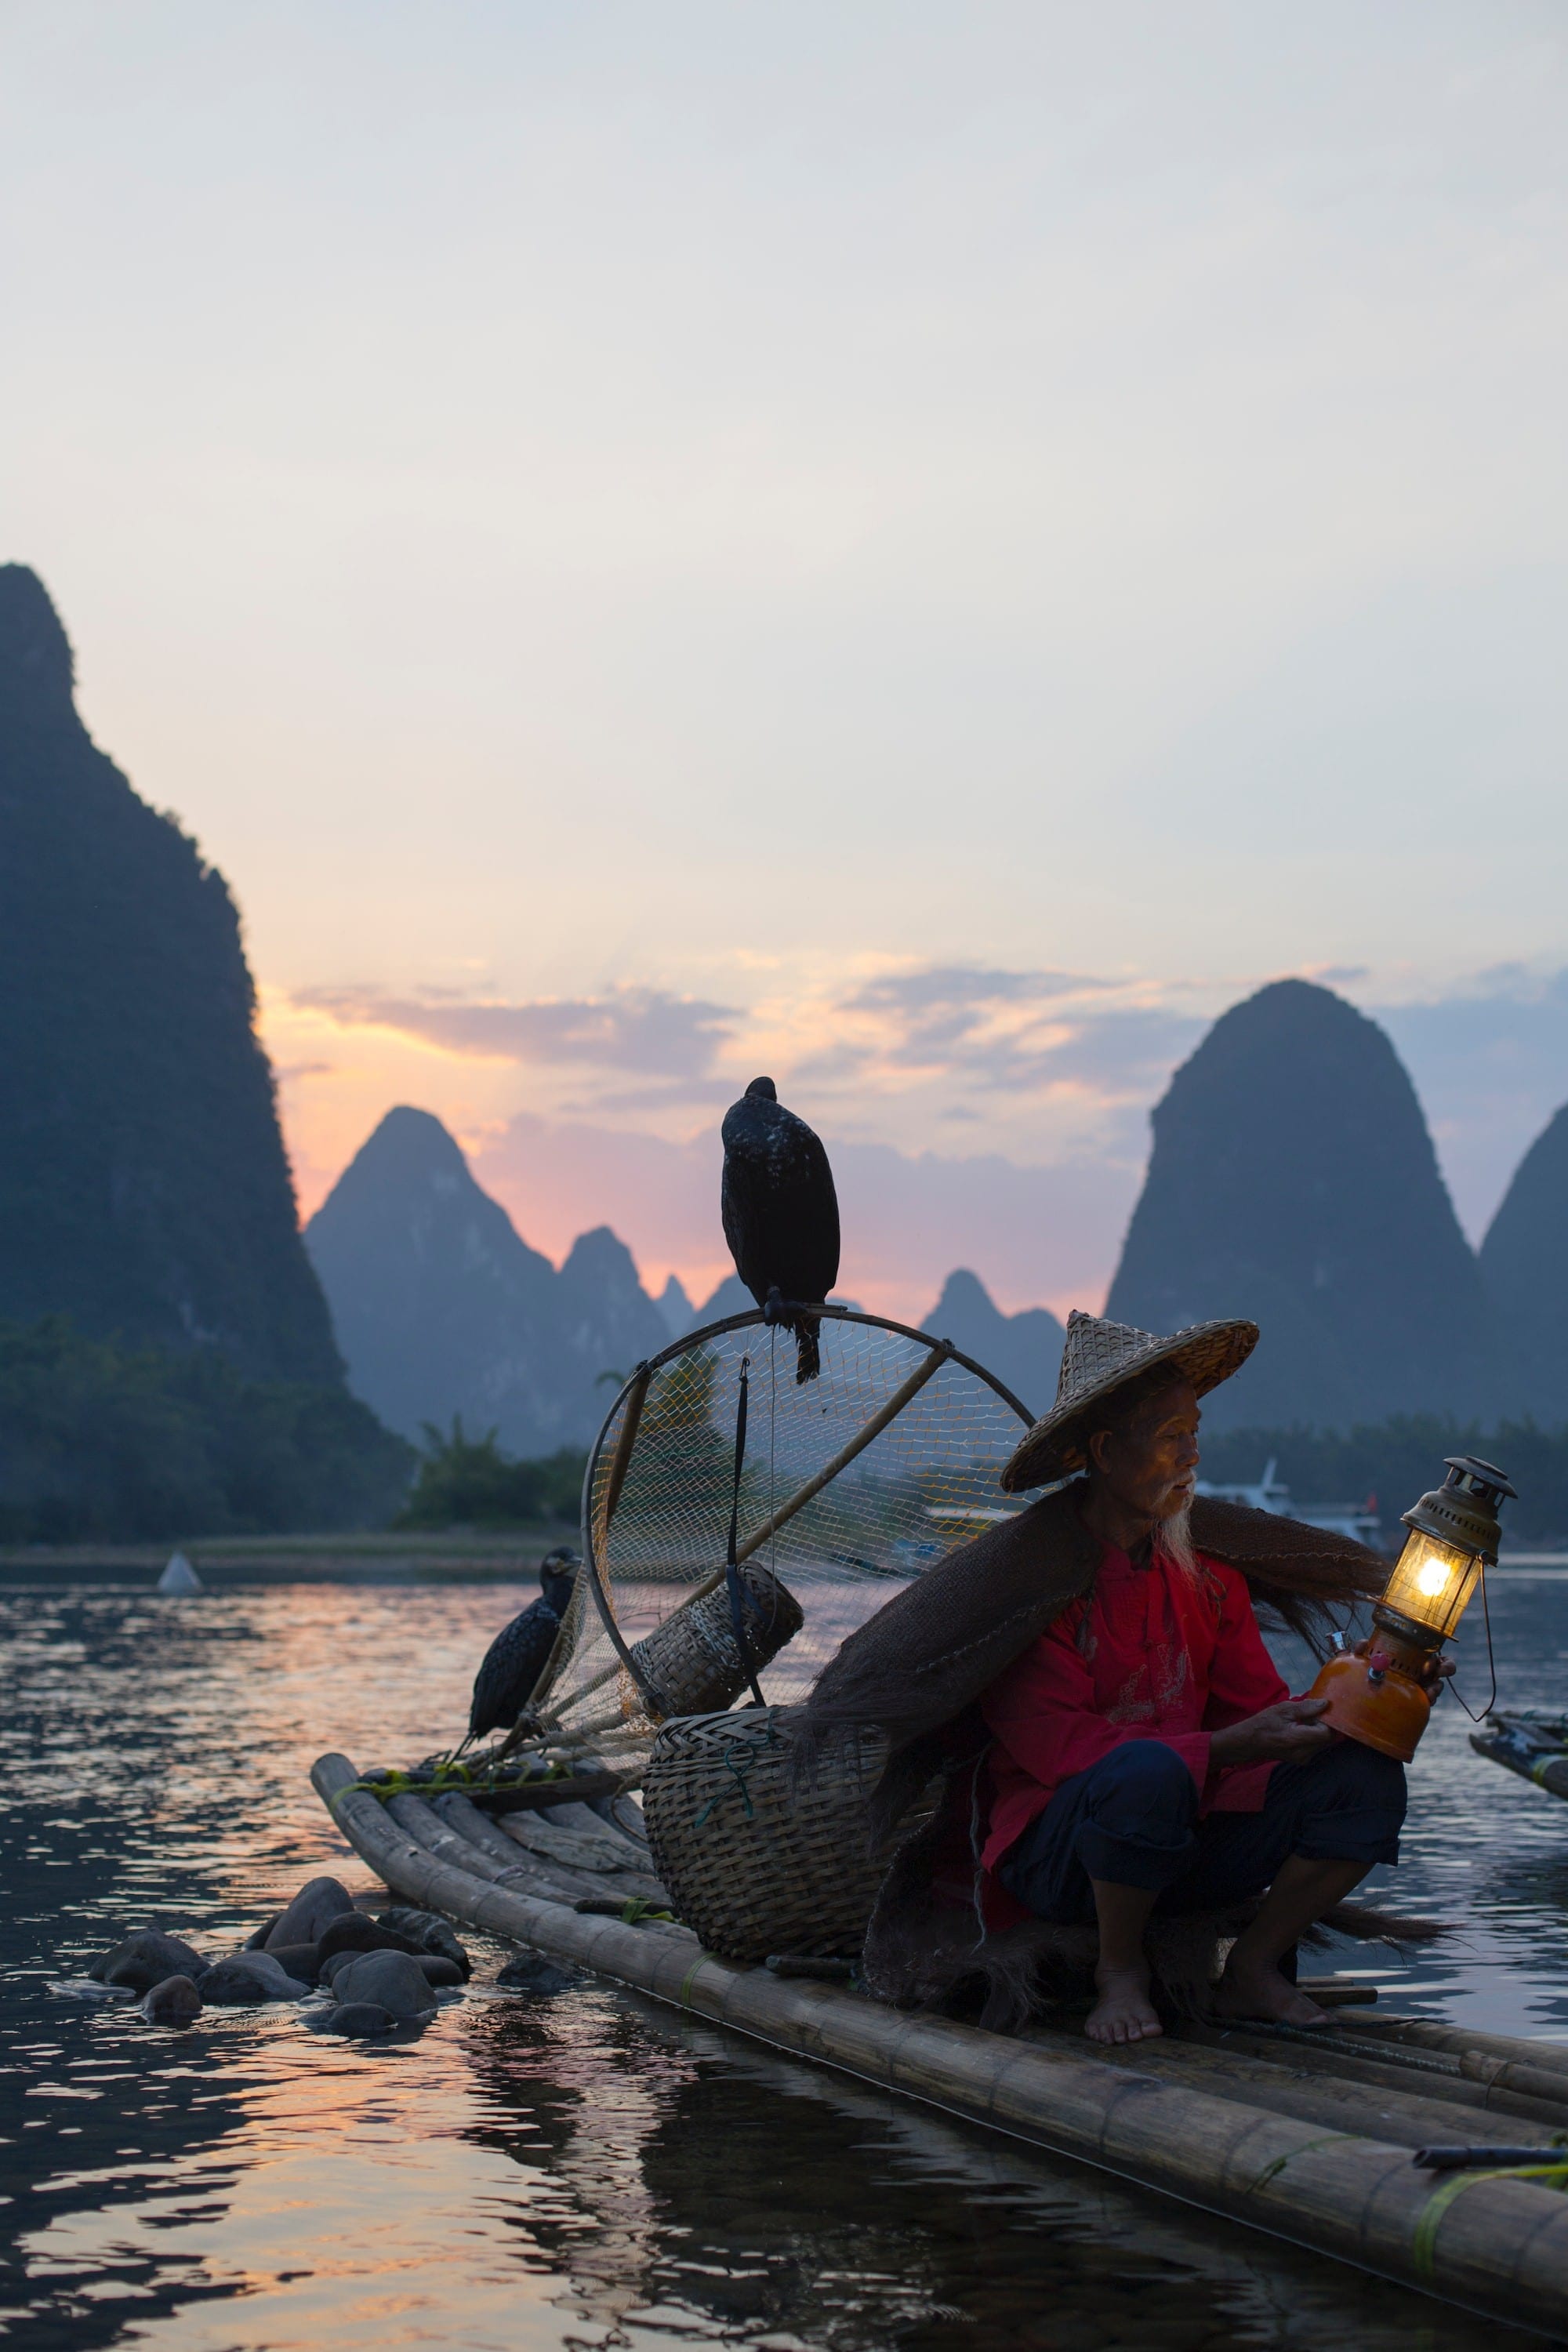 From Guilin To Hanoi: A Cultural Odyssey Through Landscapes And Borders